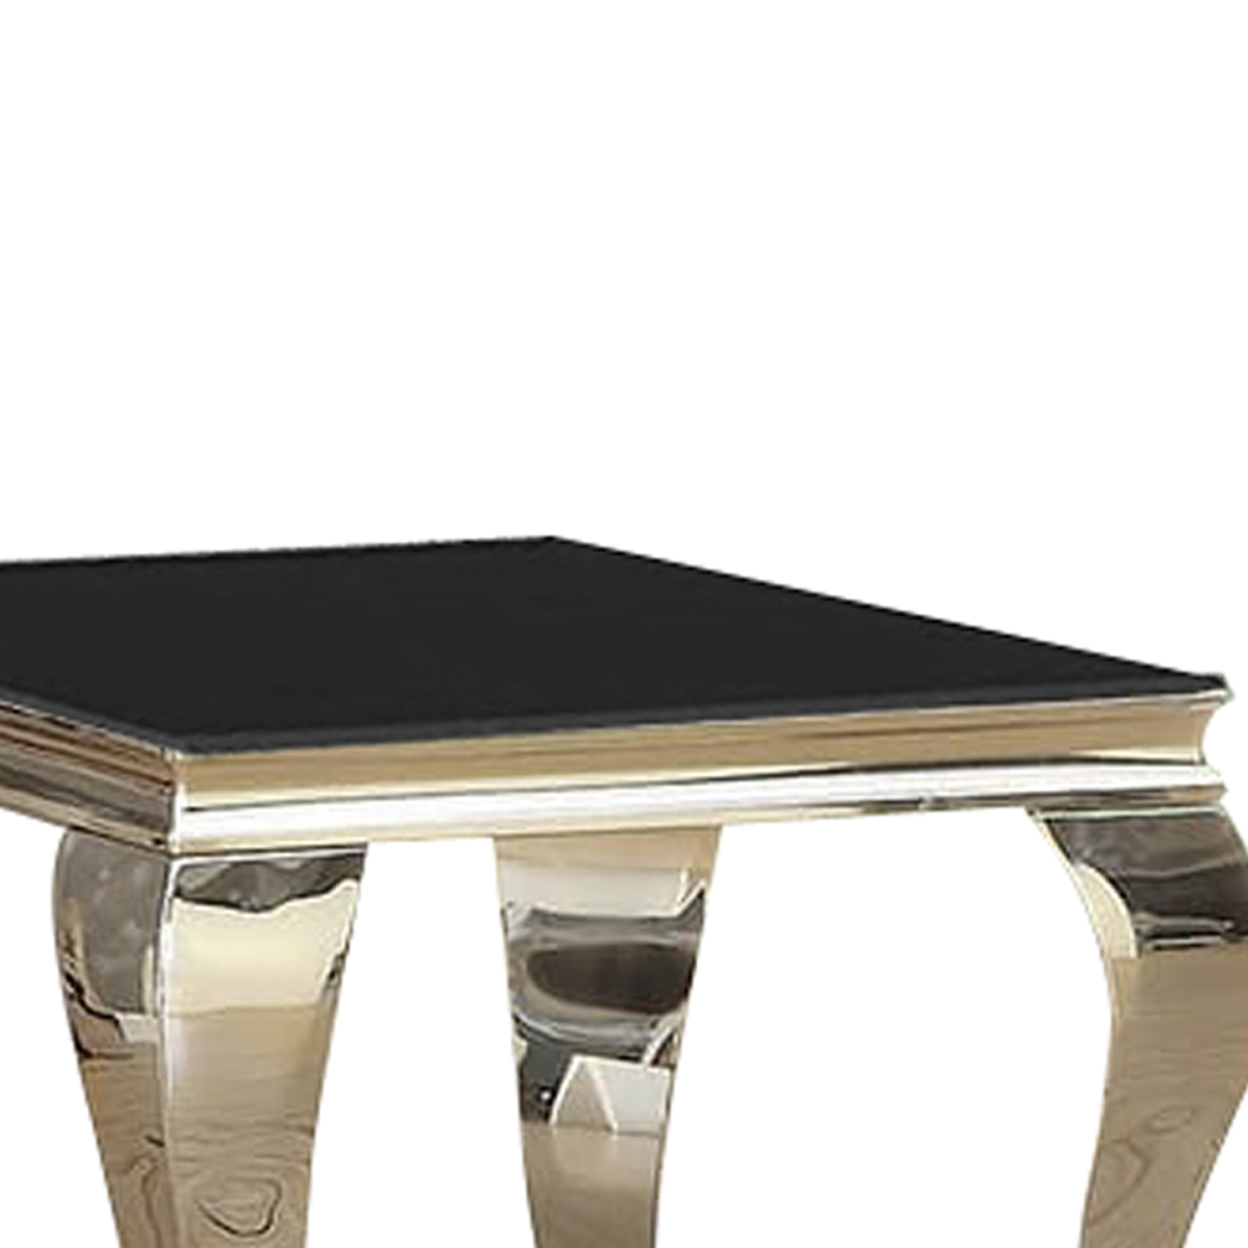 Contemporary Style Wooden End Table With Glass Top, Silver And Black- Saltoro Sherpi